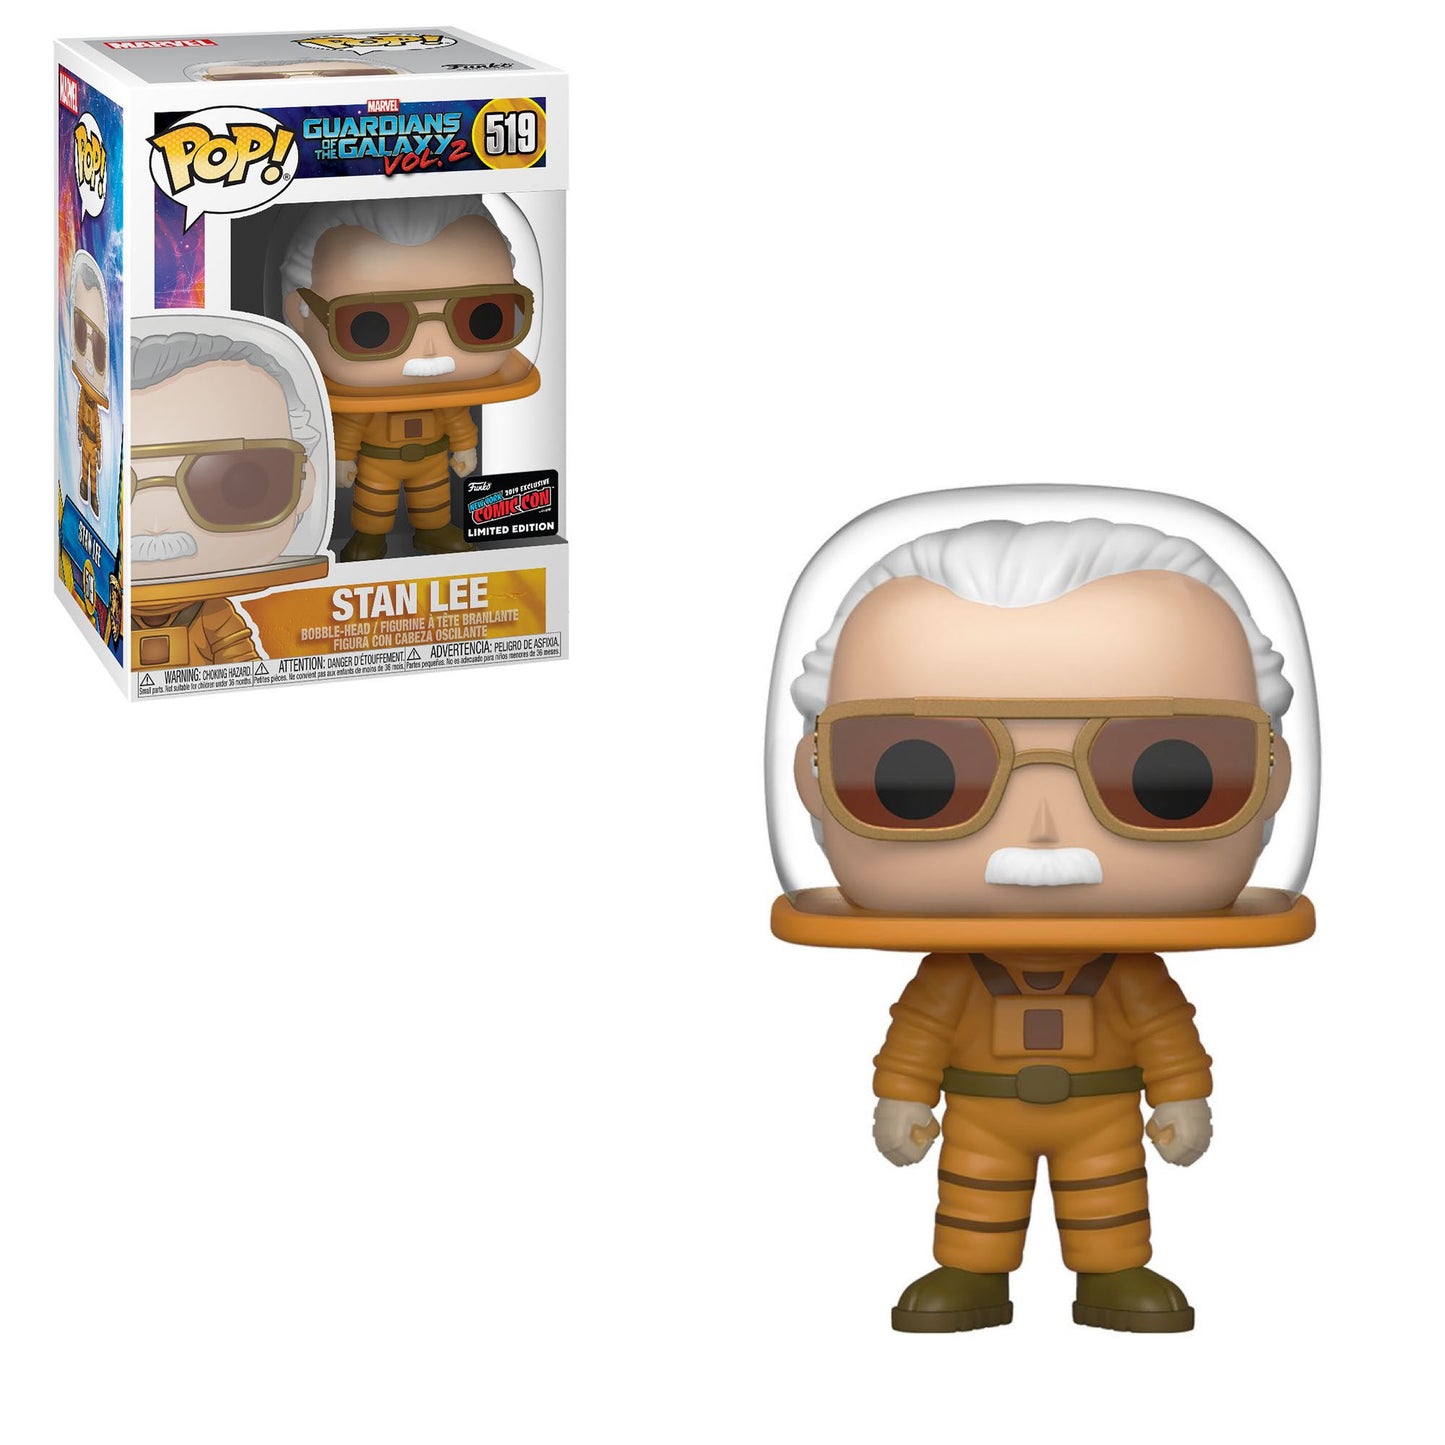 Funko POP! Marvel Guardians of the Galaxy Vol. 2 Stan Lee #519 [Astronaut] NYCC Stickered Exclusive